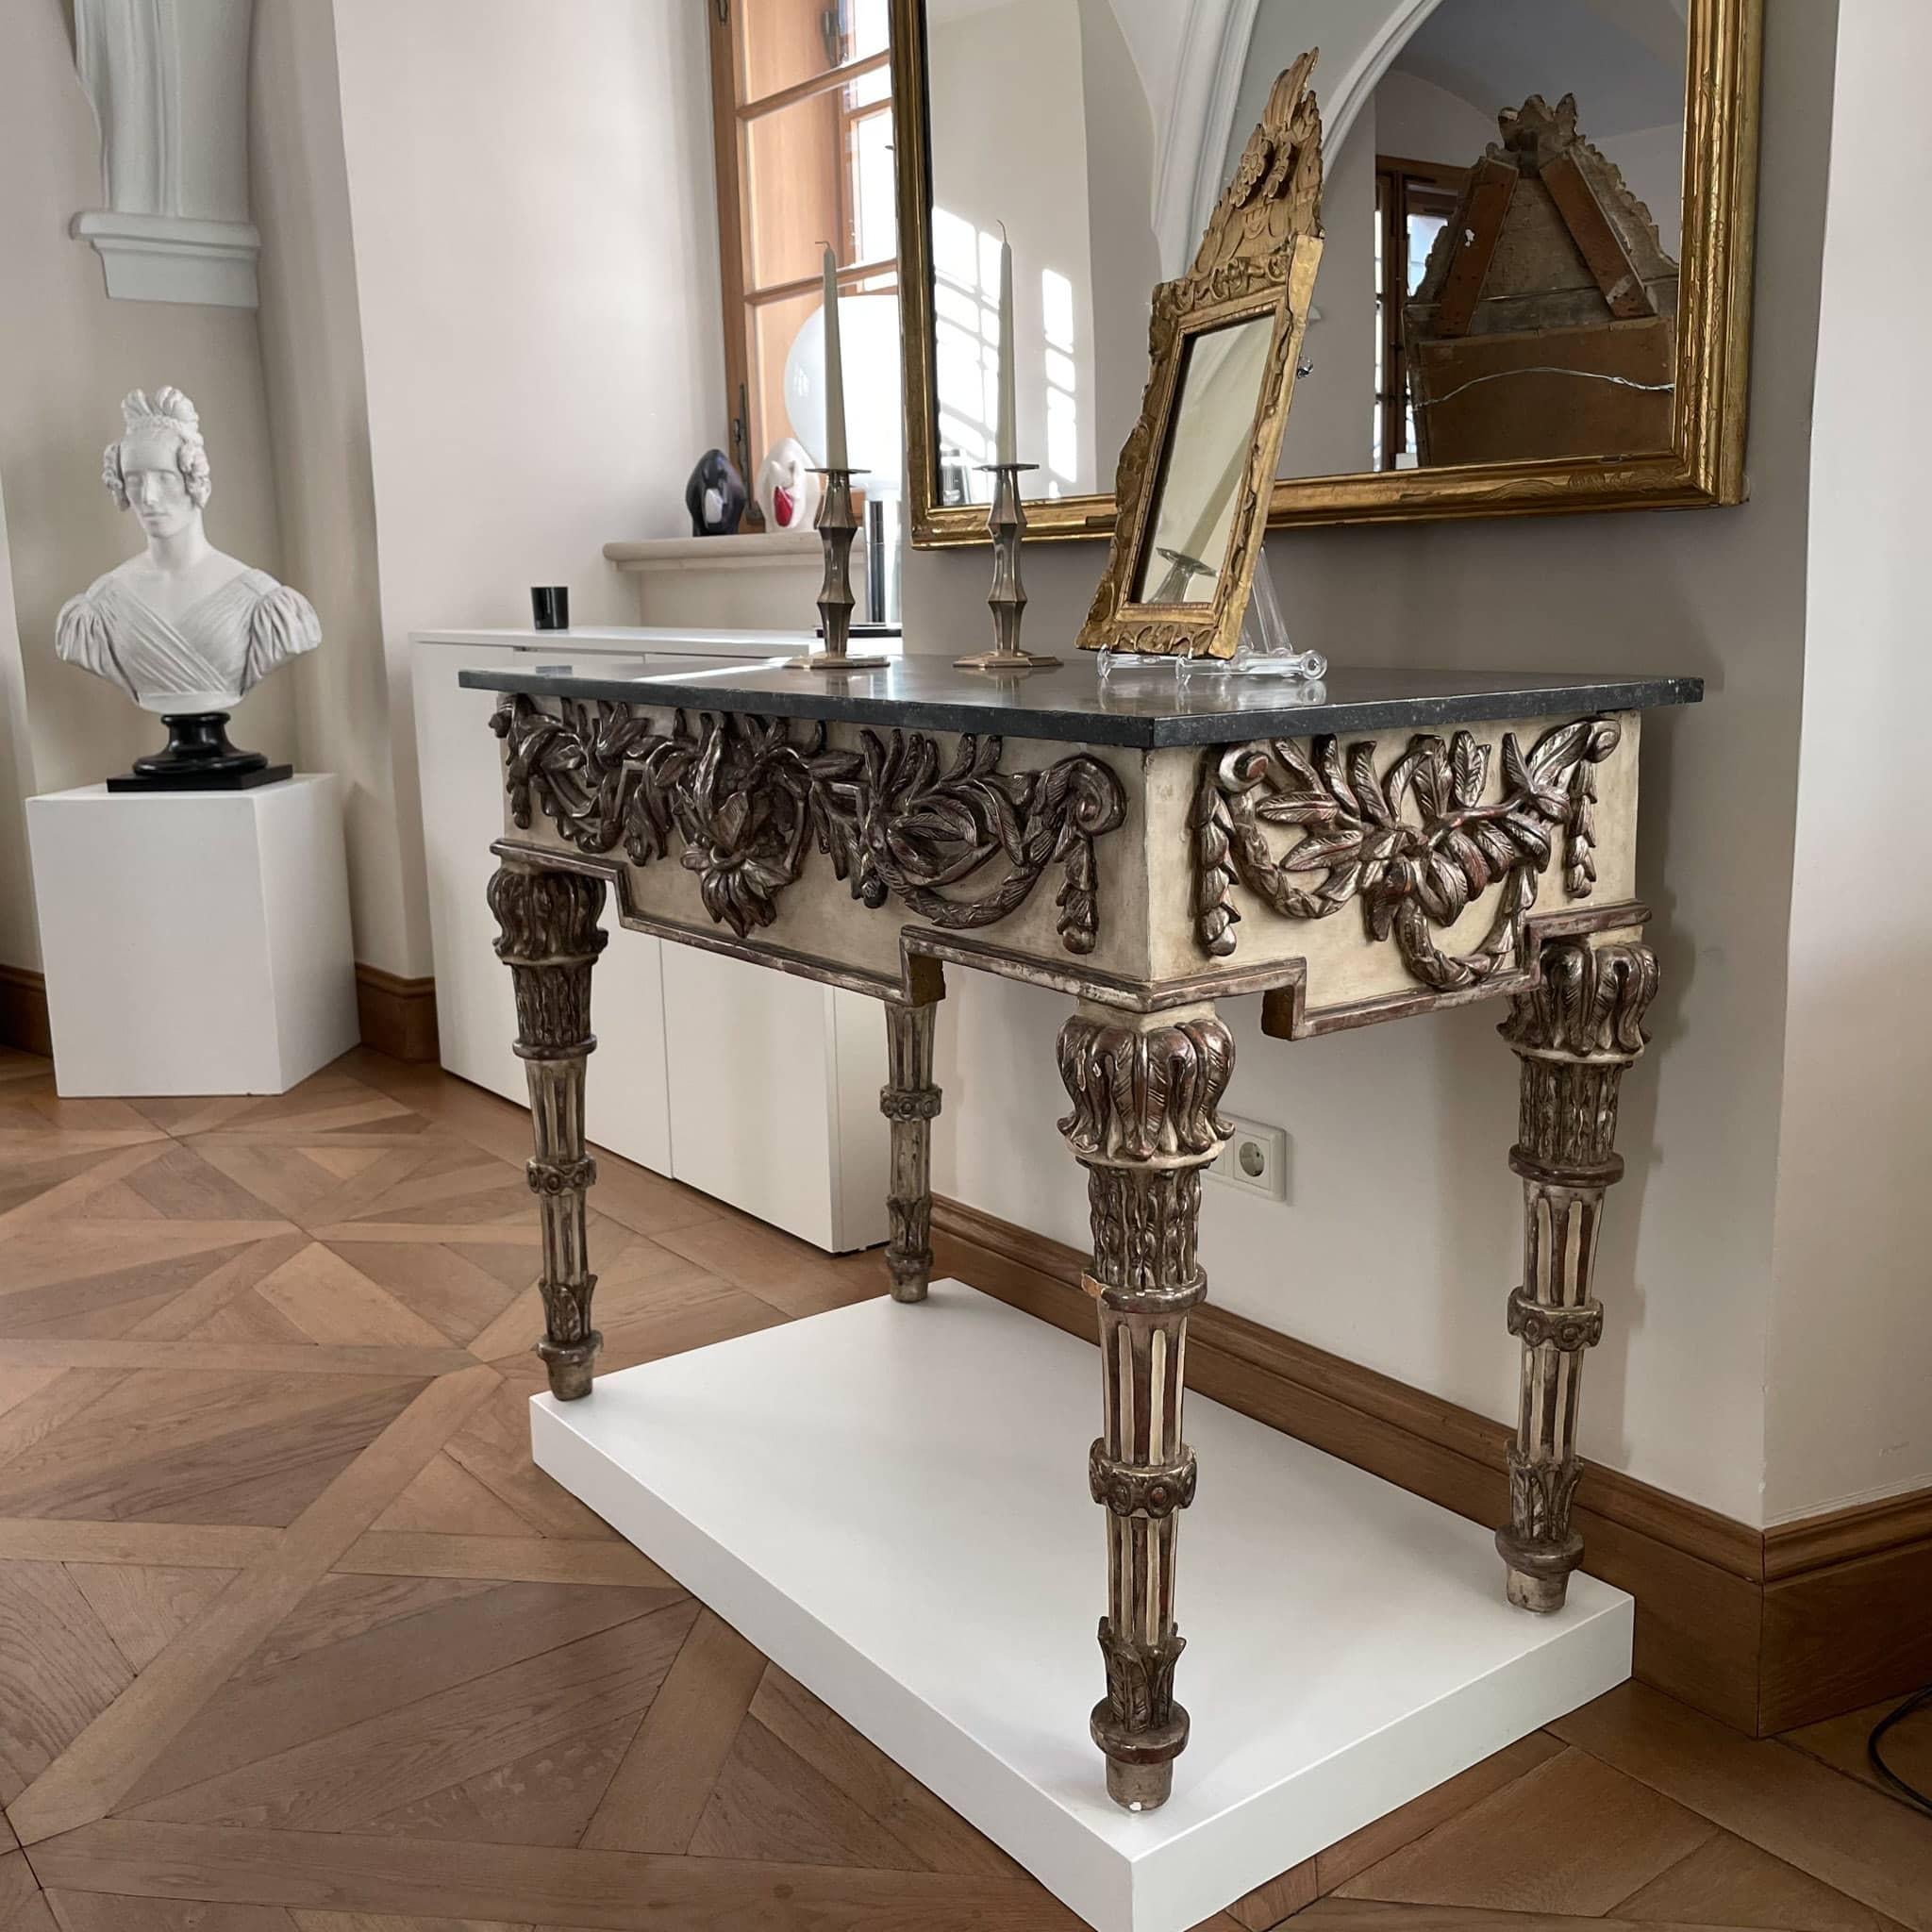 Painted and Silver patinated Console Table with Marble Top, Italian circa 1790. Exquisite Italian console table dating from the 1790s with black marble top and partly silvered legs and frame. The legs are fluted and slightly tapered, the frame is